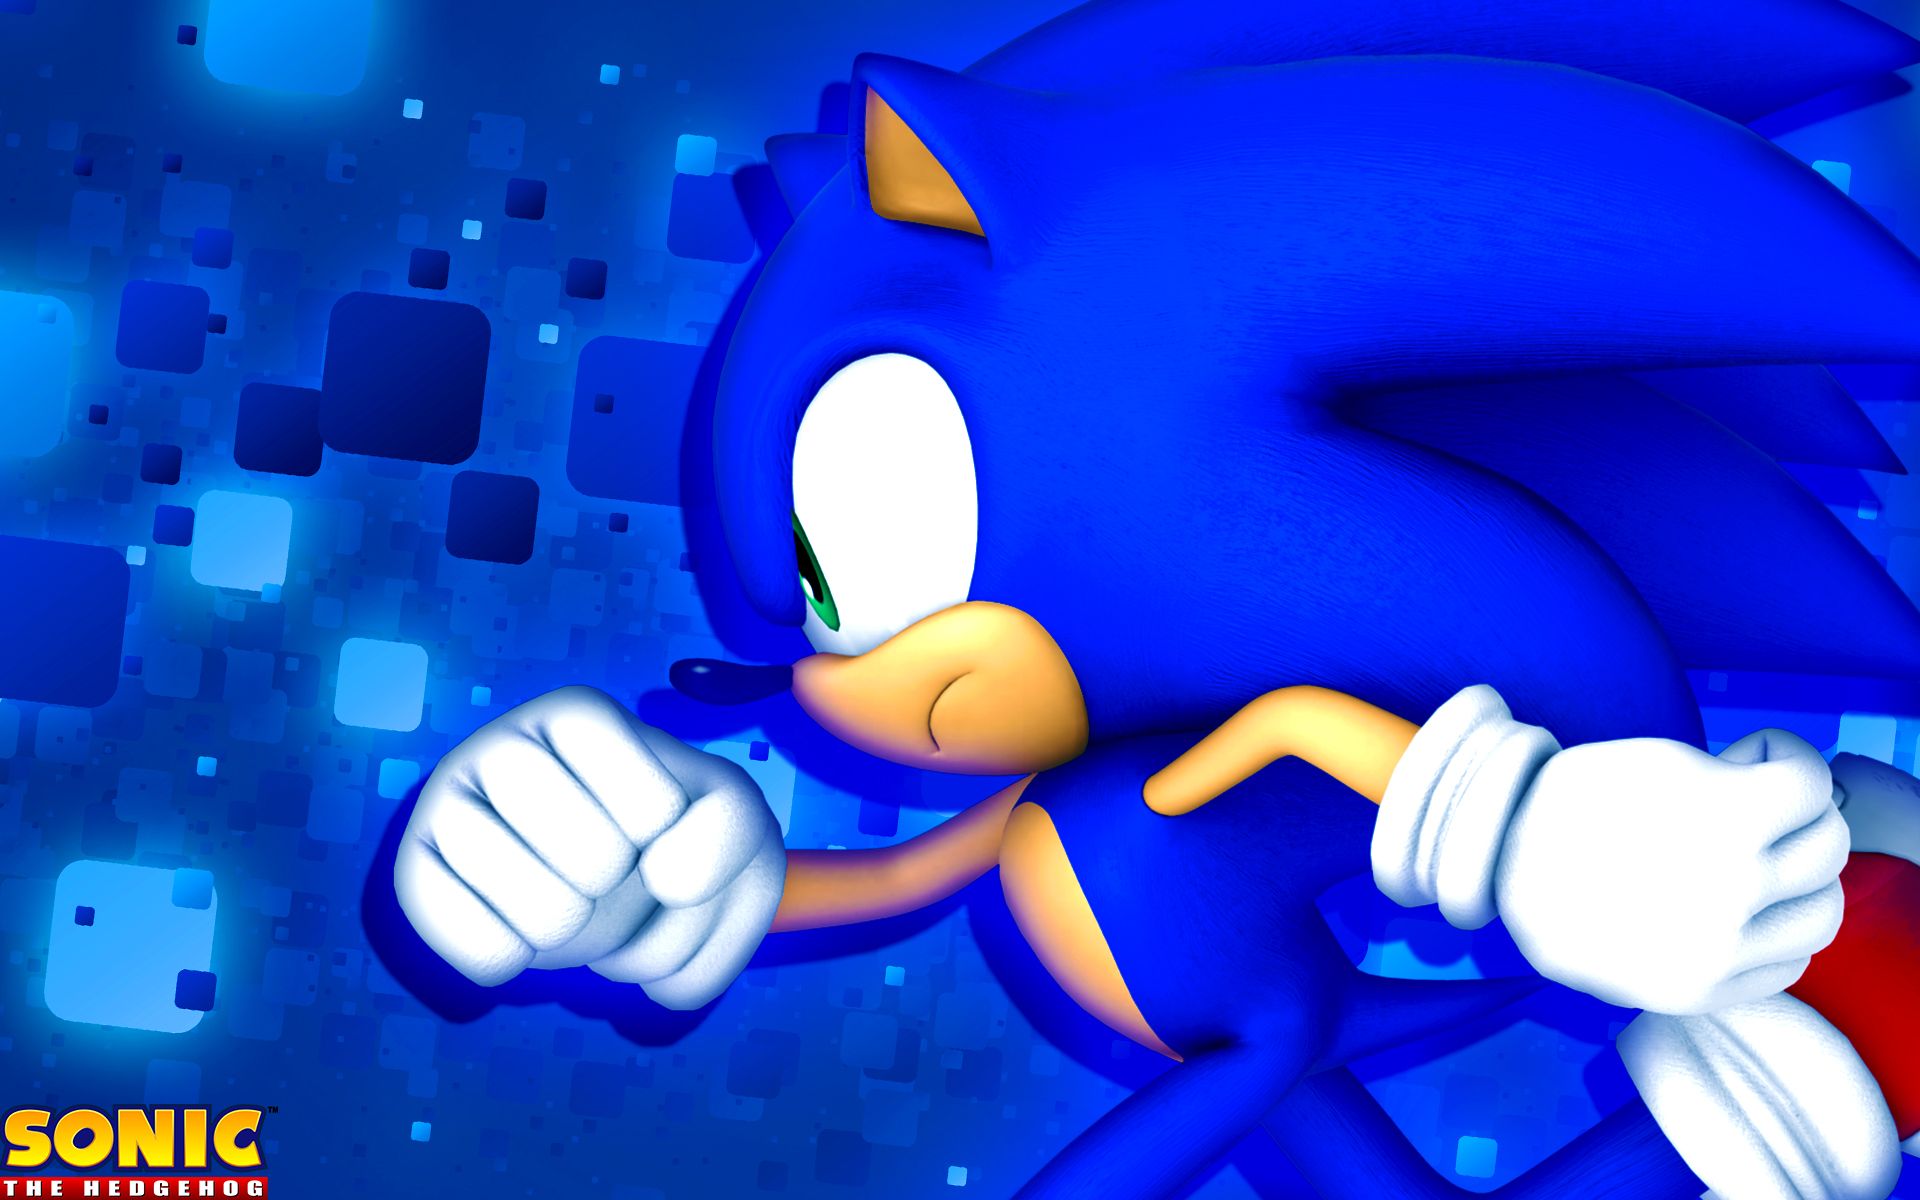 Free download Classic Sonic The Hedgehog Blue HD Wallpaper Cool